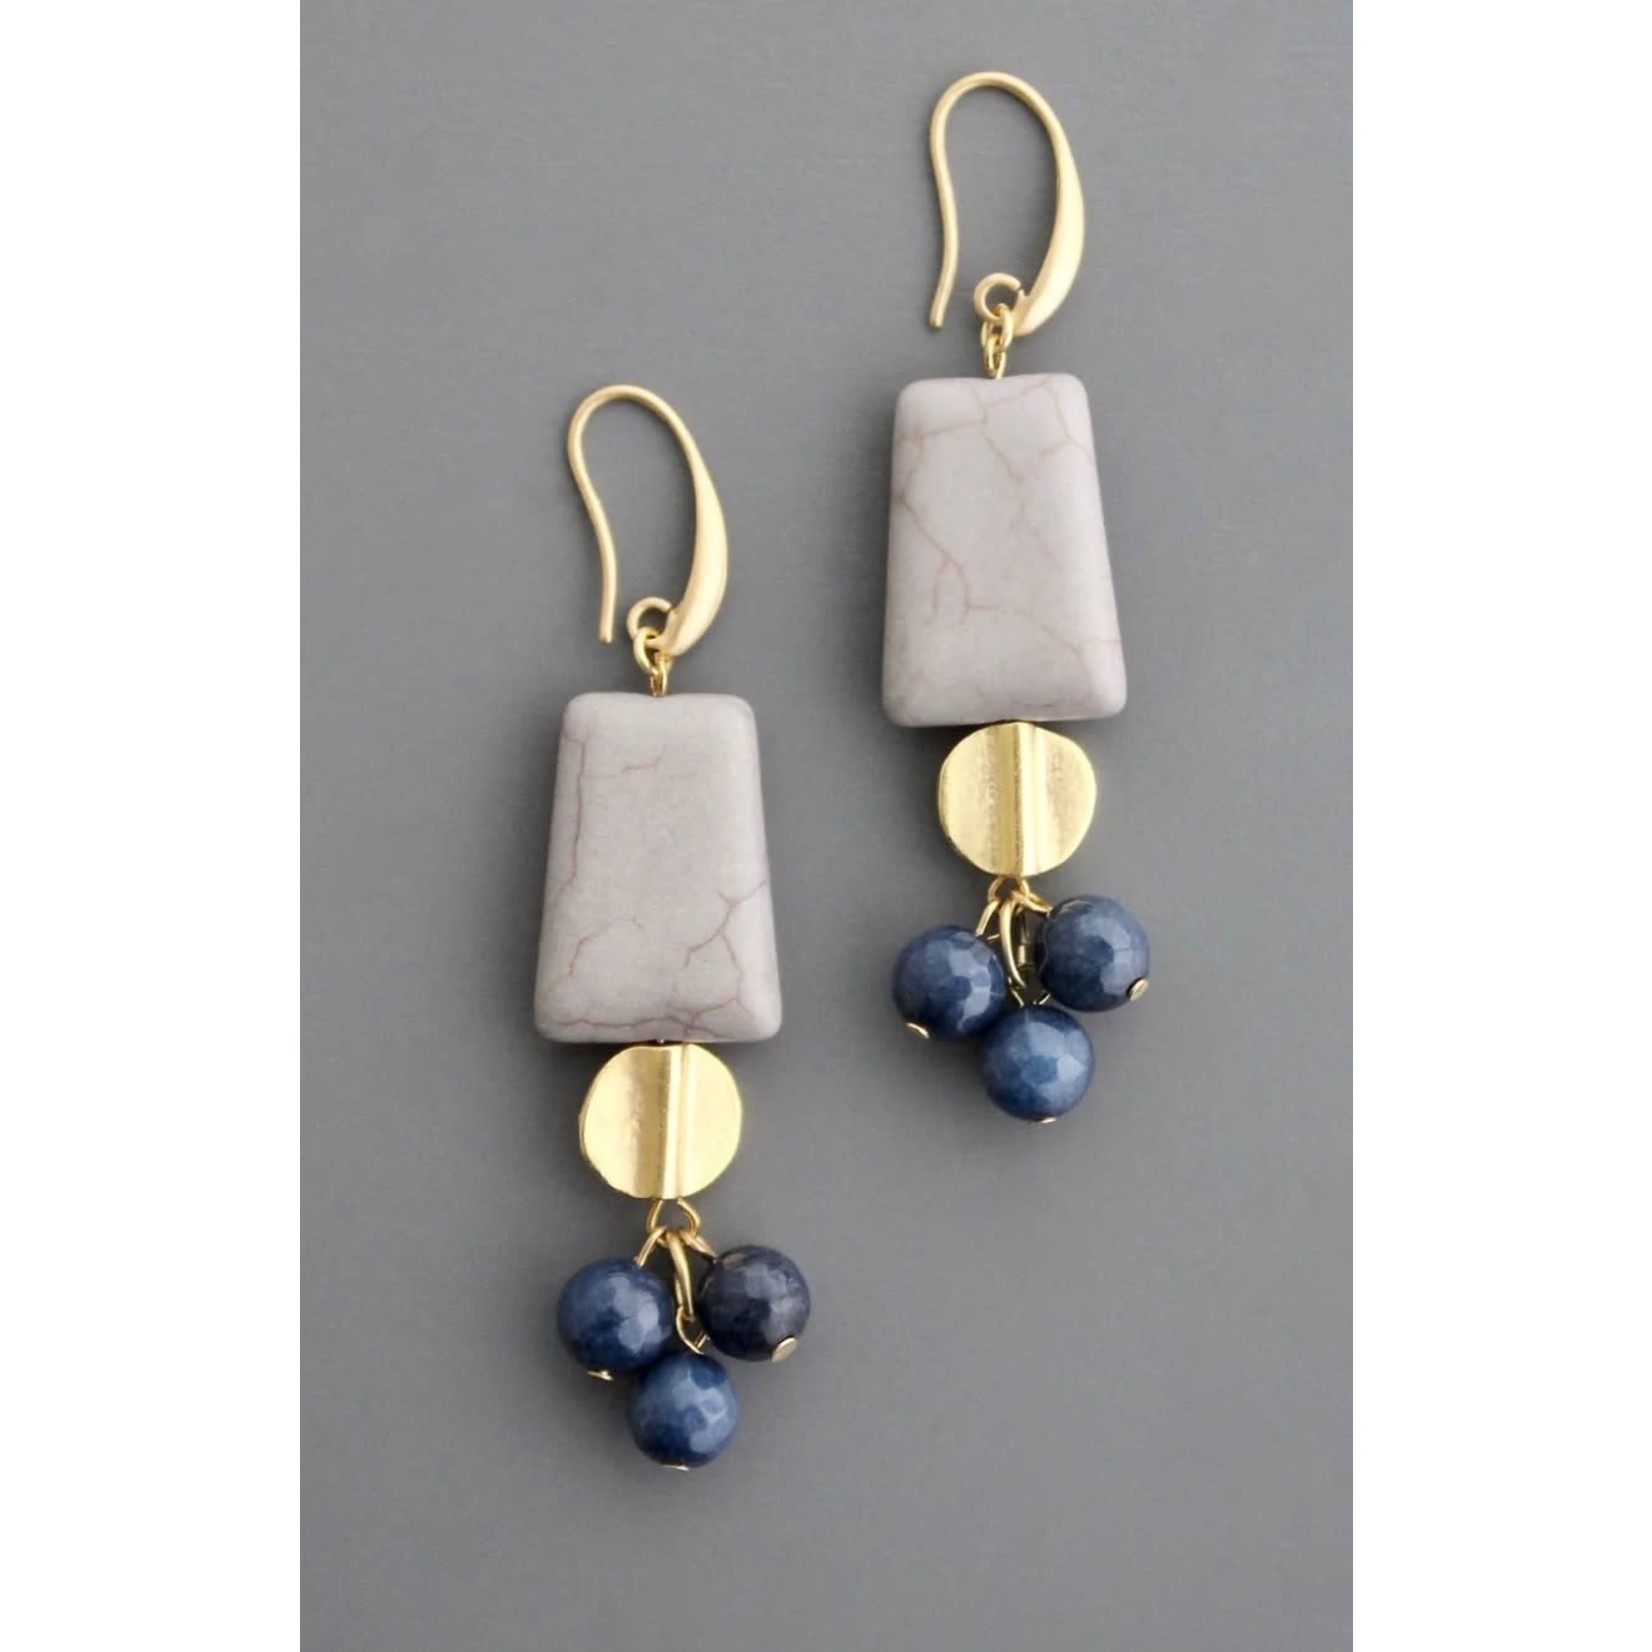 DAVID AUBREY GRAY AND NAVY BLUE CLUSTER EARRINGS